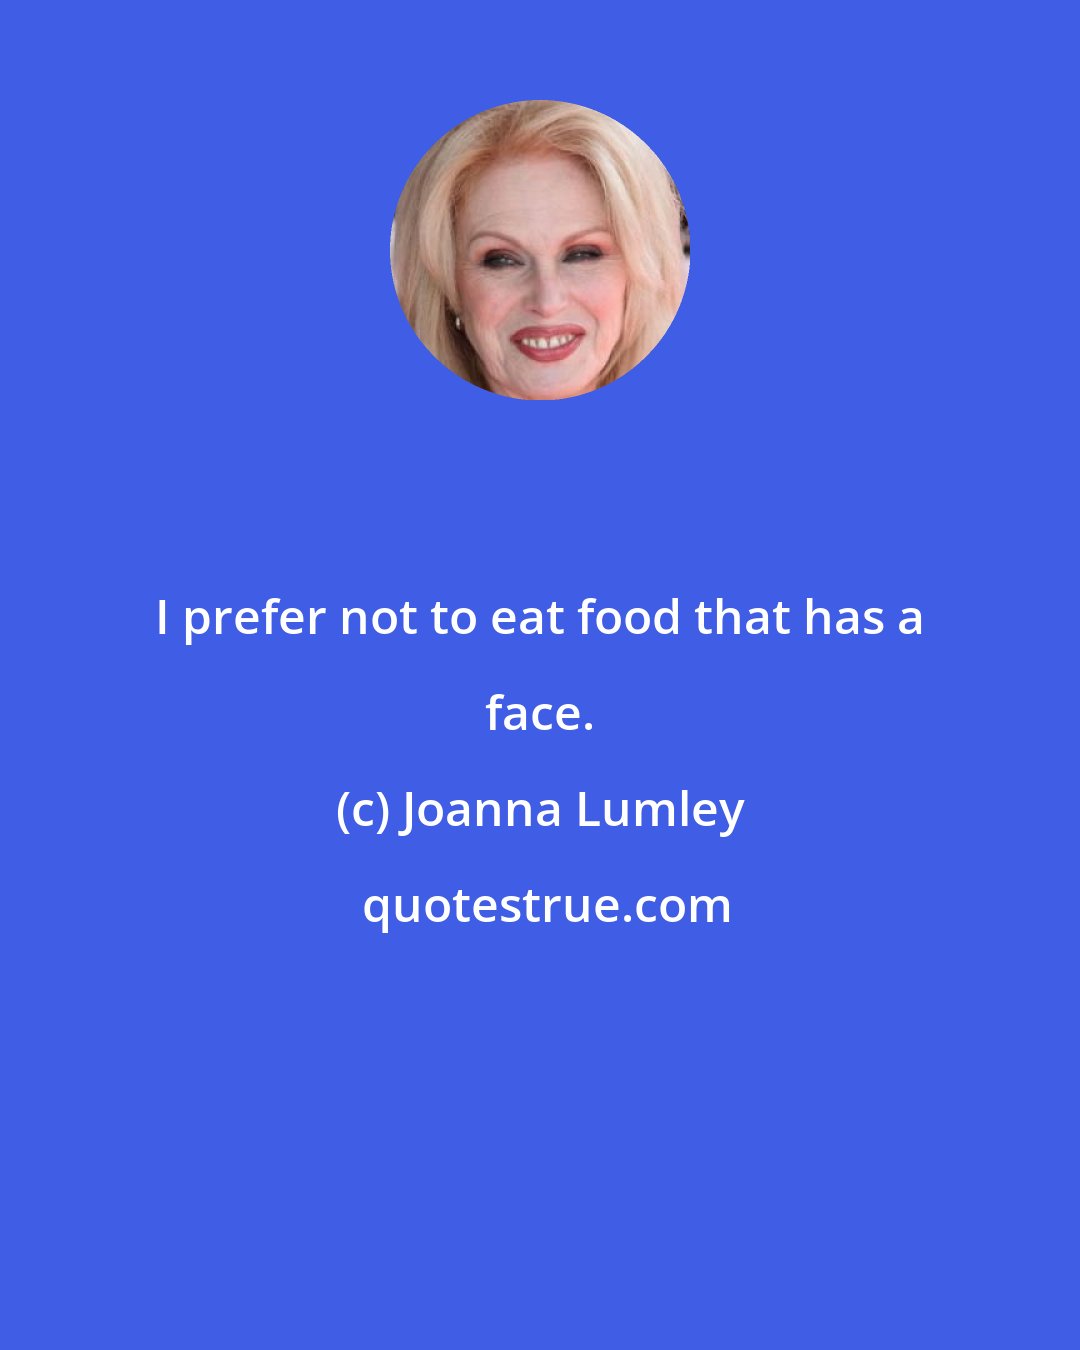 Joanna Lumley: I prefer not to eat food that has a face.